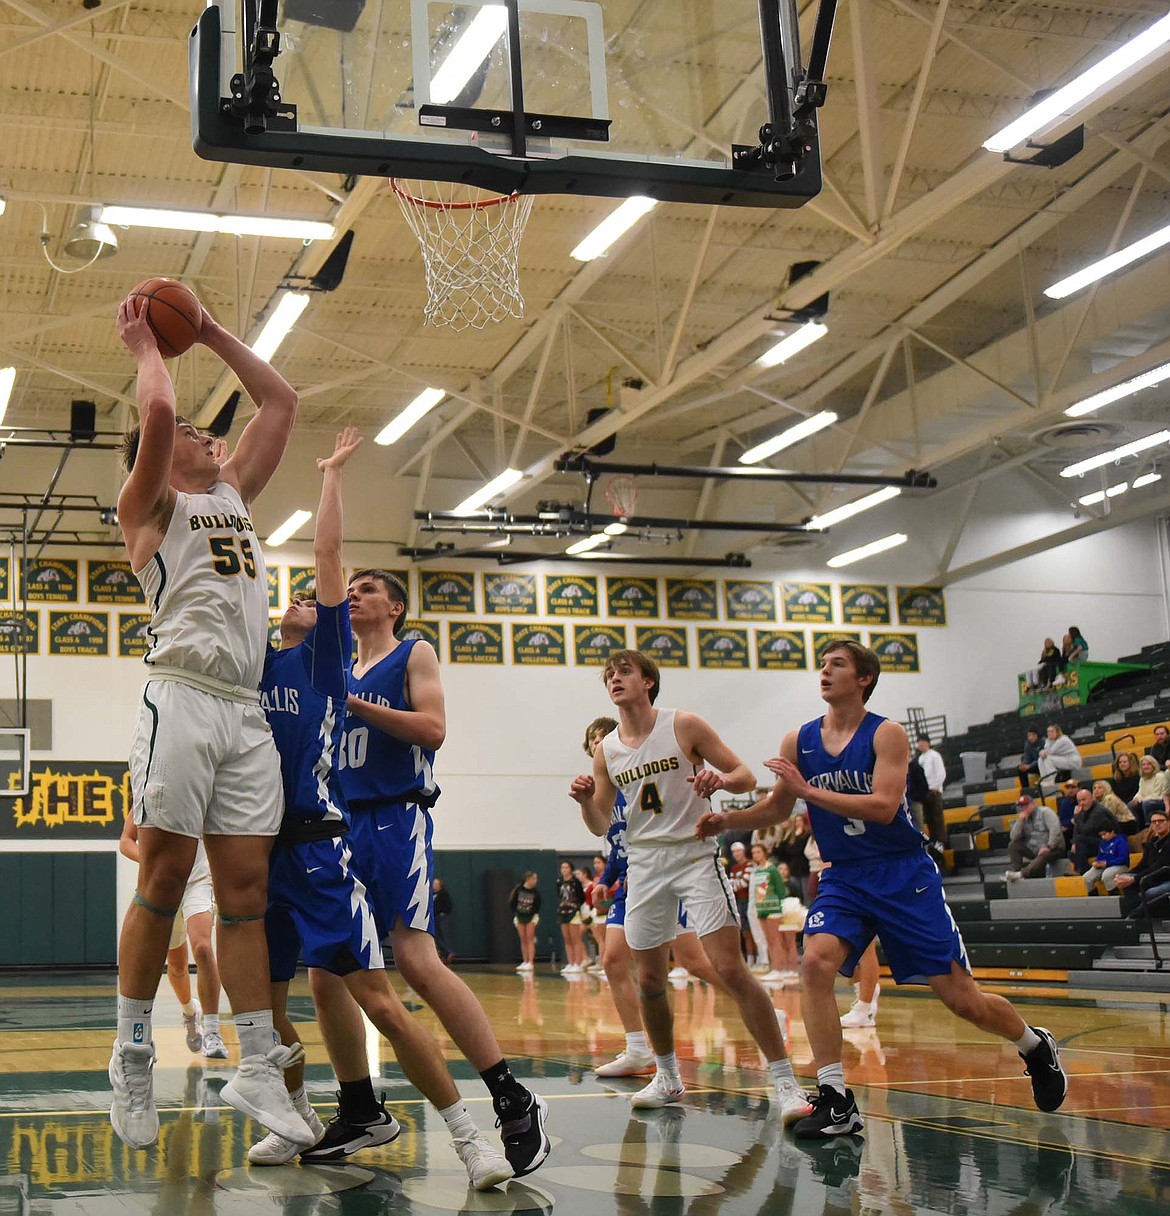 Whitefish’s Talon Holmquist rises up to the basket against Corvallis Friday night at the Dawg Pound. (Heidi Desch/Whitefish Pilot)